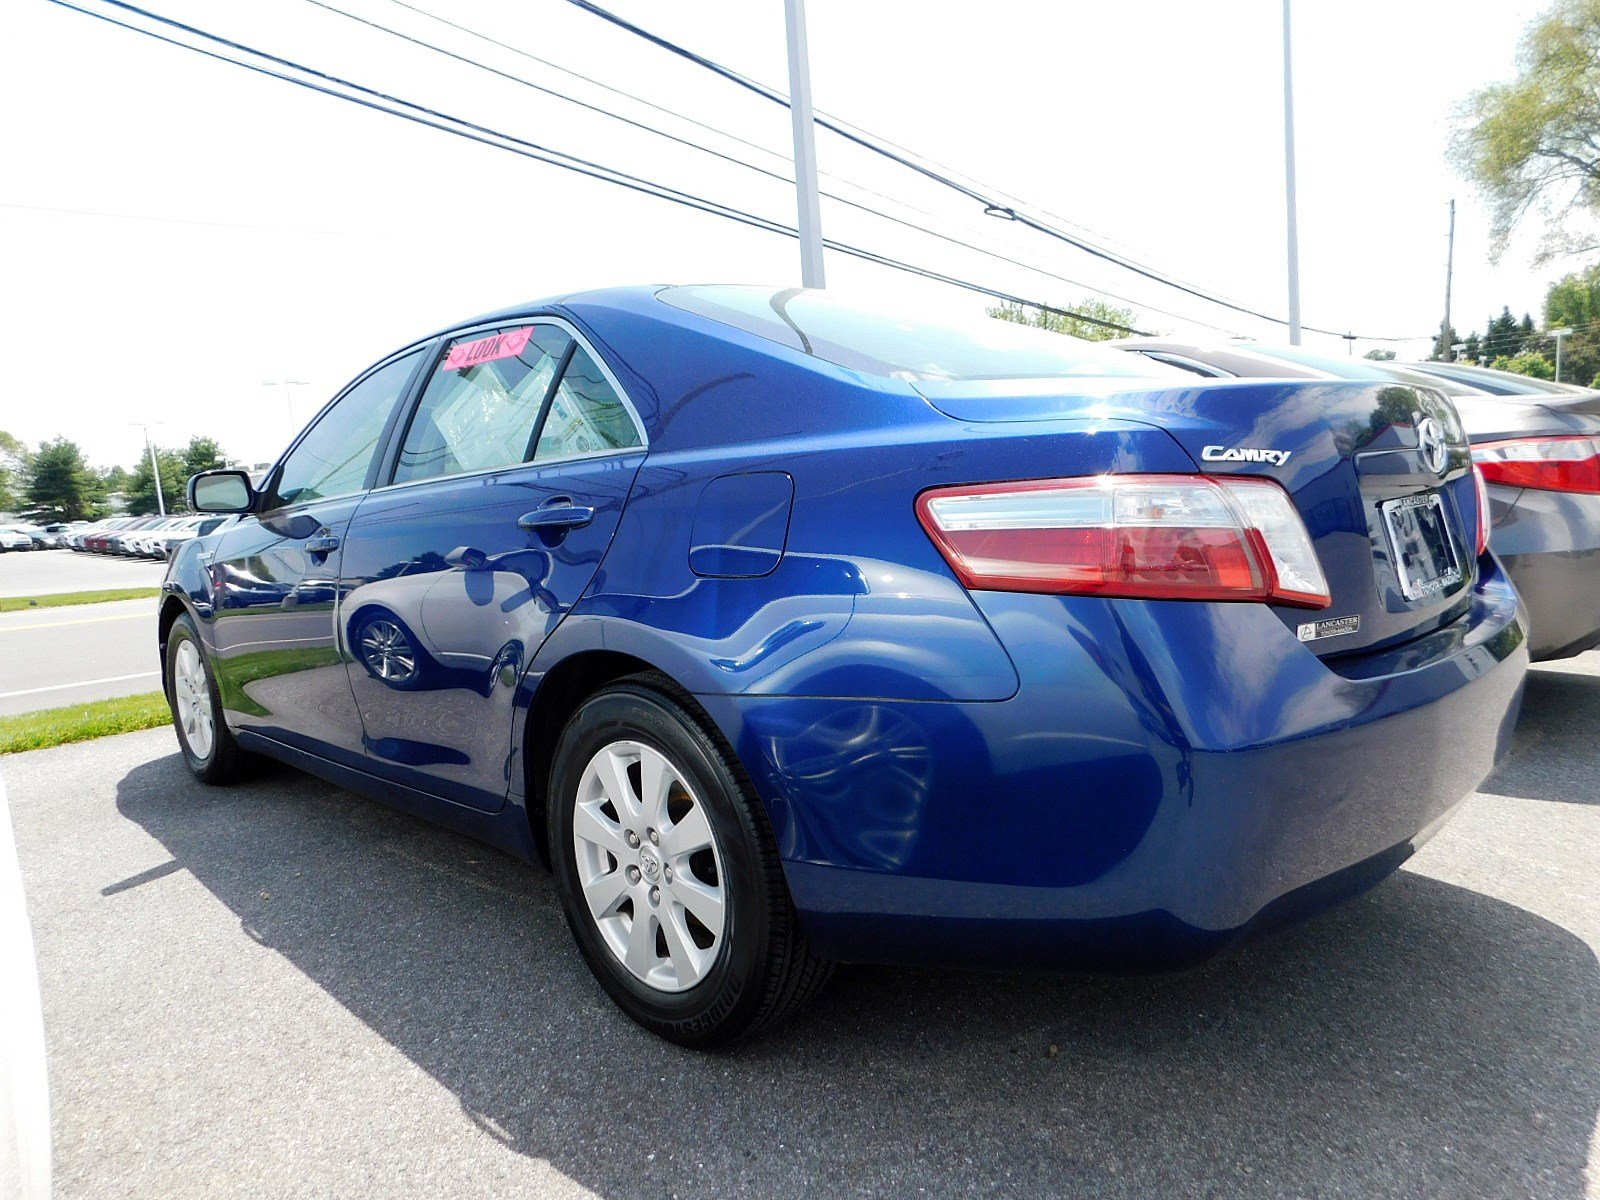 Pre-Owned 2009 Toyota Camry Hybrid 4DR SDN HYBRID 4dr Car in East ...